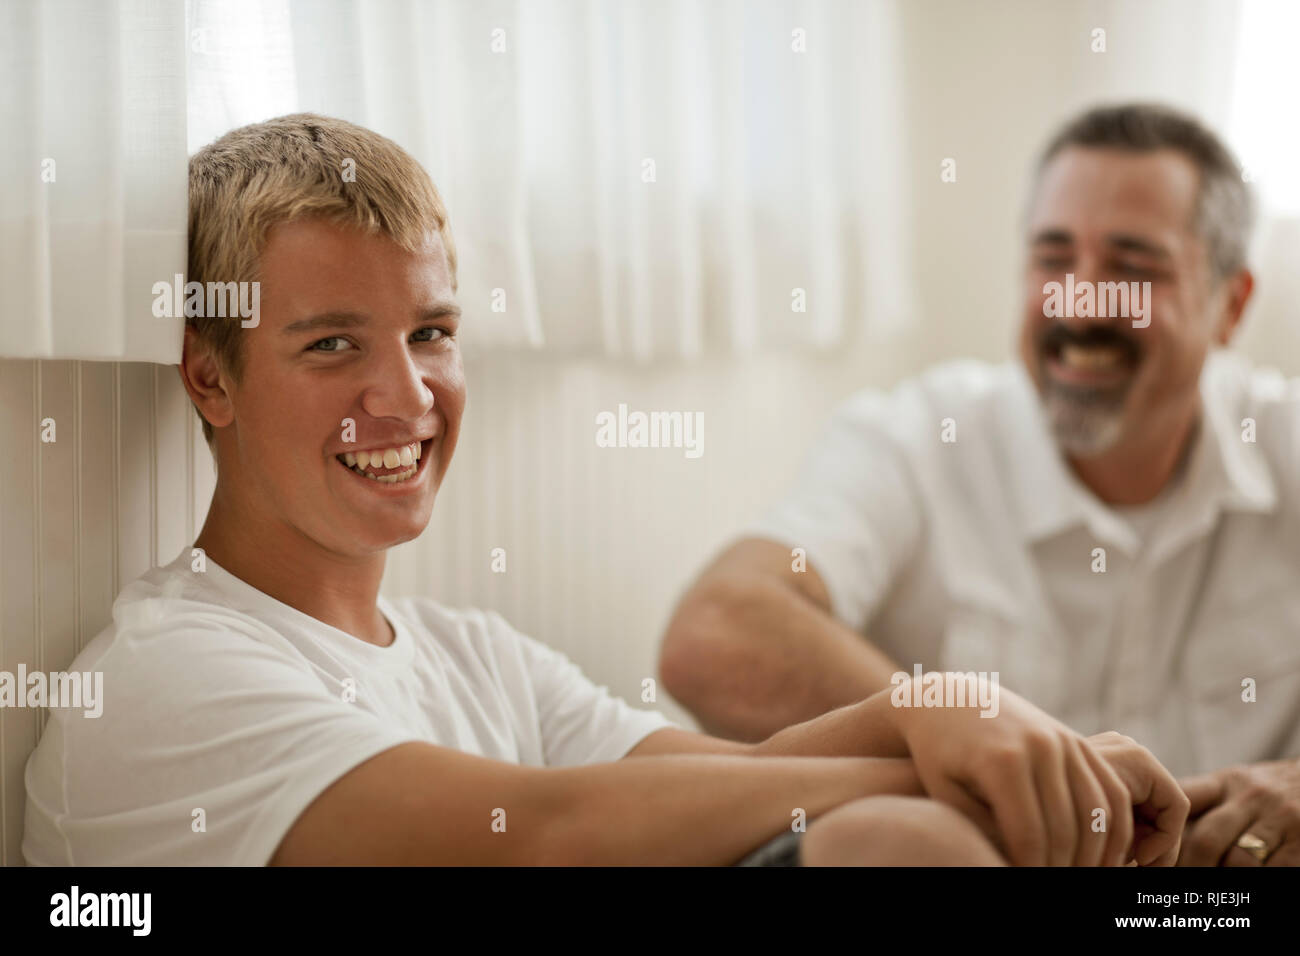 Portrait of a smiling teenage boy and mature adult man sitting together. Stock Photo